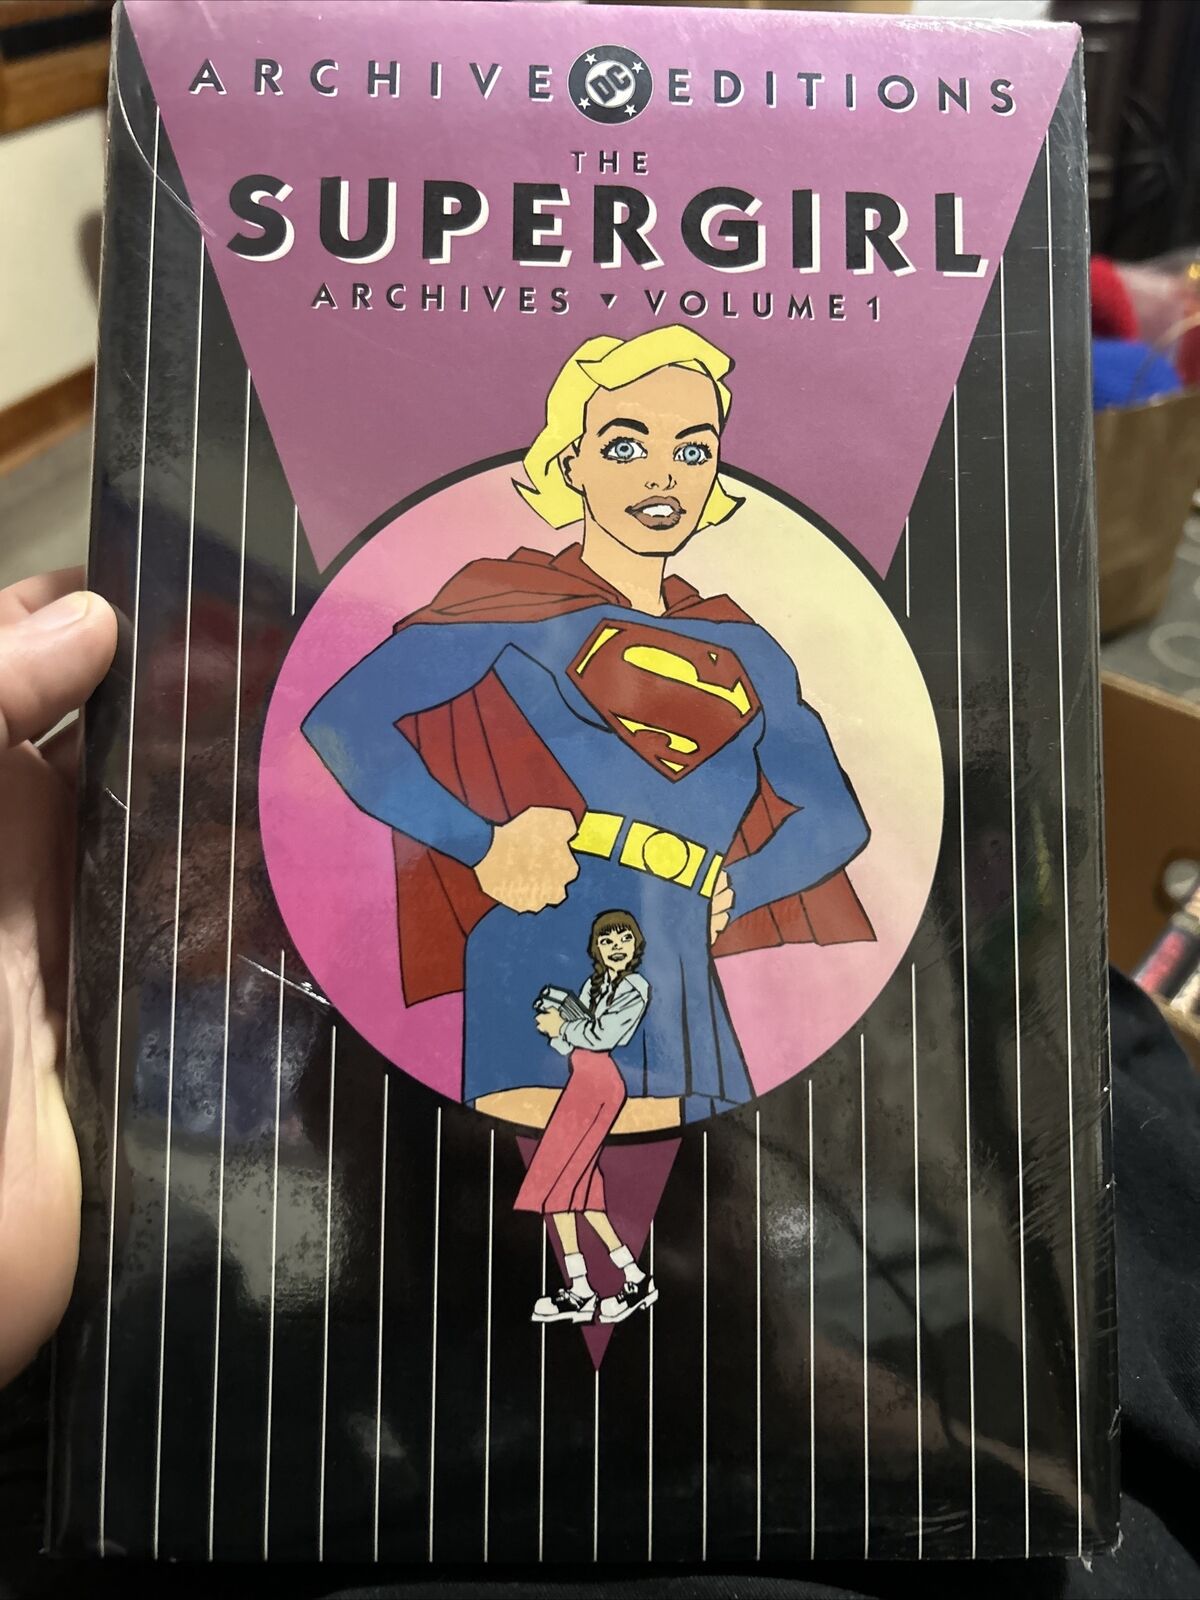 DC Archive Editions The Supergirl Volume Archives Volume 1 2001 Hardcover NEW